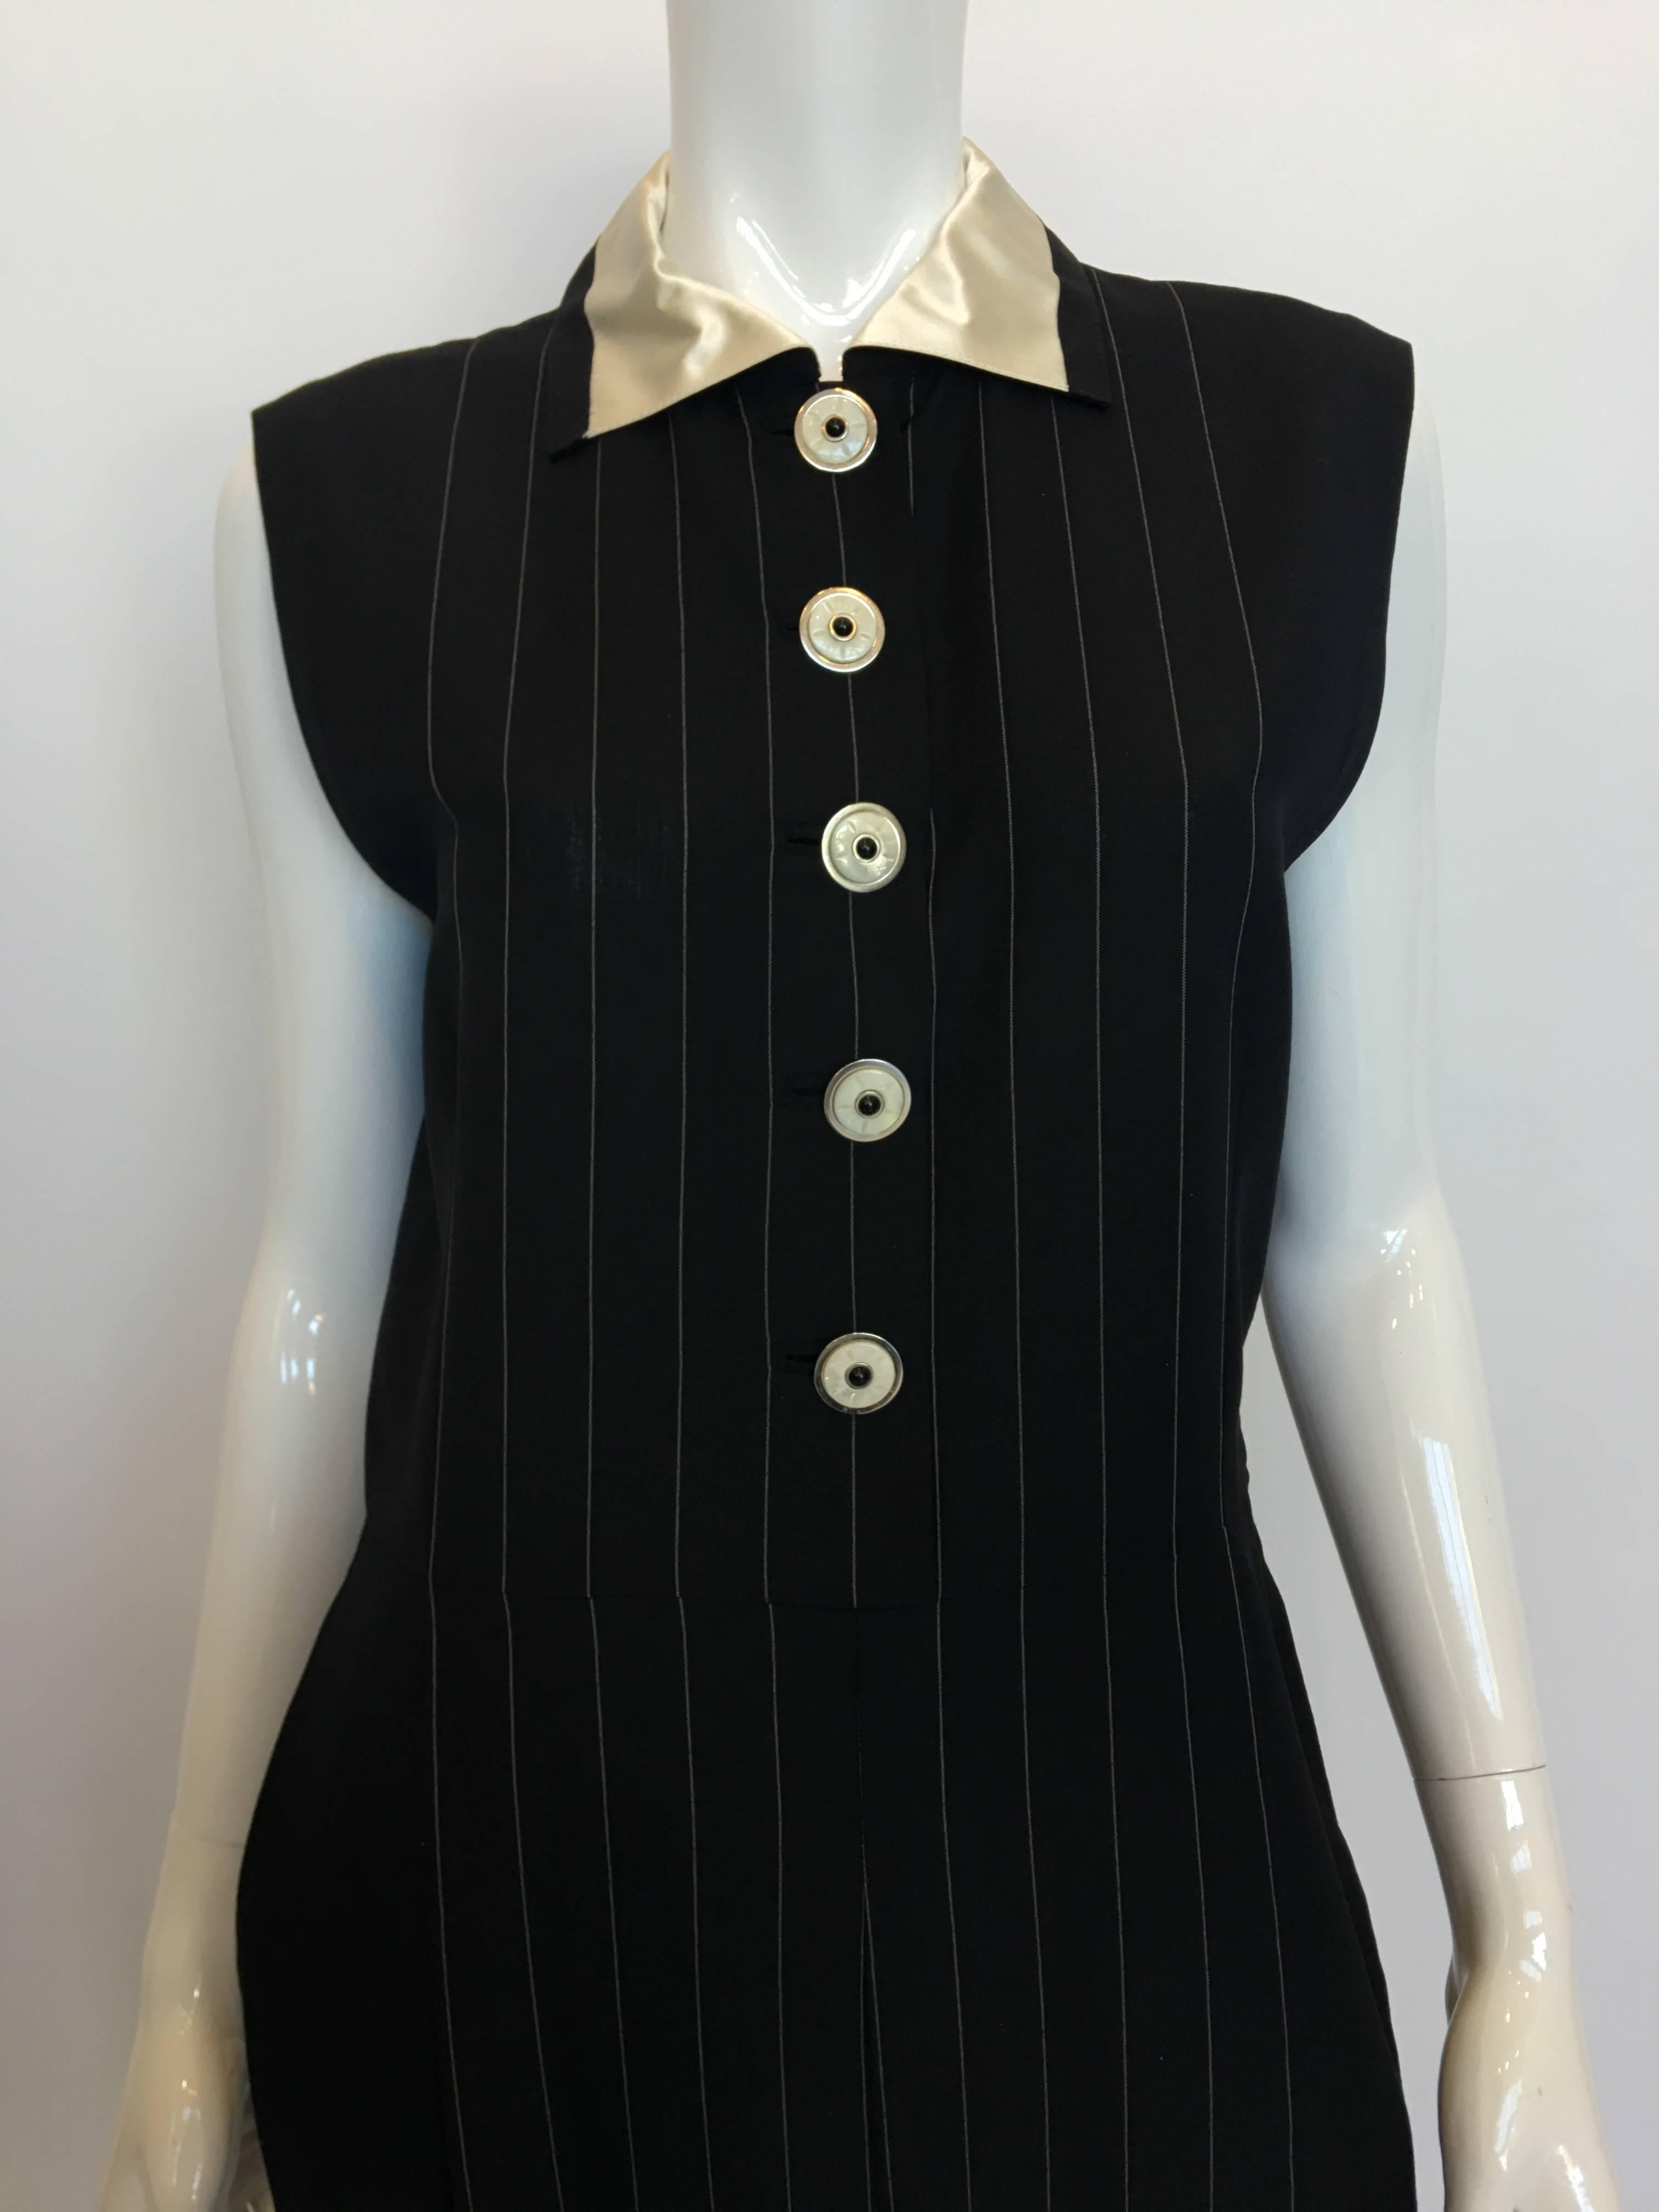 Gianni Versace Couture 1980's Black Pin Striped Jumpsuit. Light weight wool , inset button holes with shell buttons. Has a satin collar with trouser pockets.

*ALL MEASUREMENTS TAKEN FLAT*
Size Label: 44

Shoulders (edge of shoulder to edge of